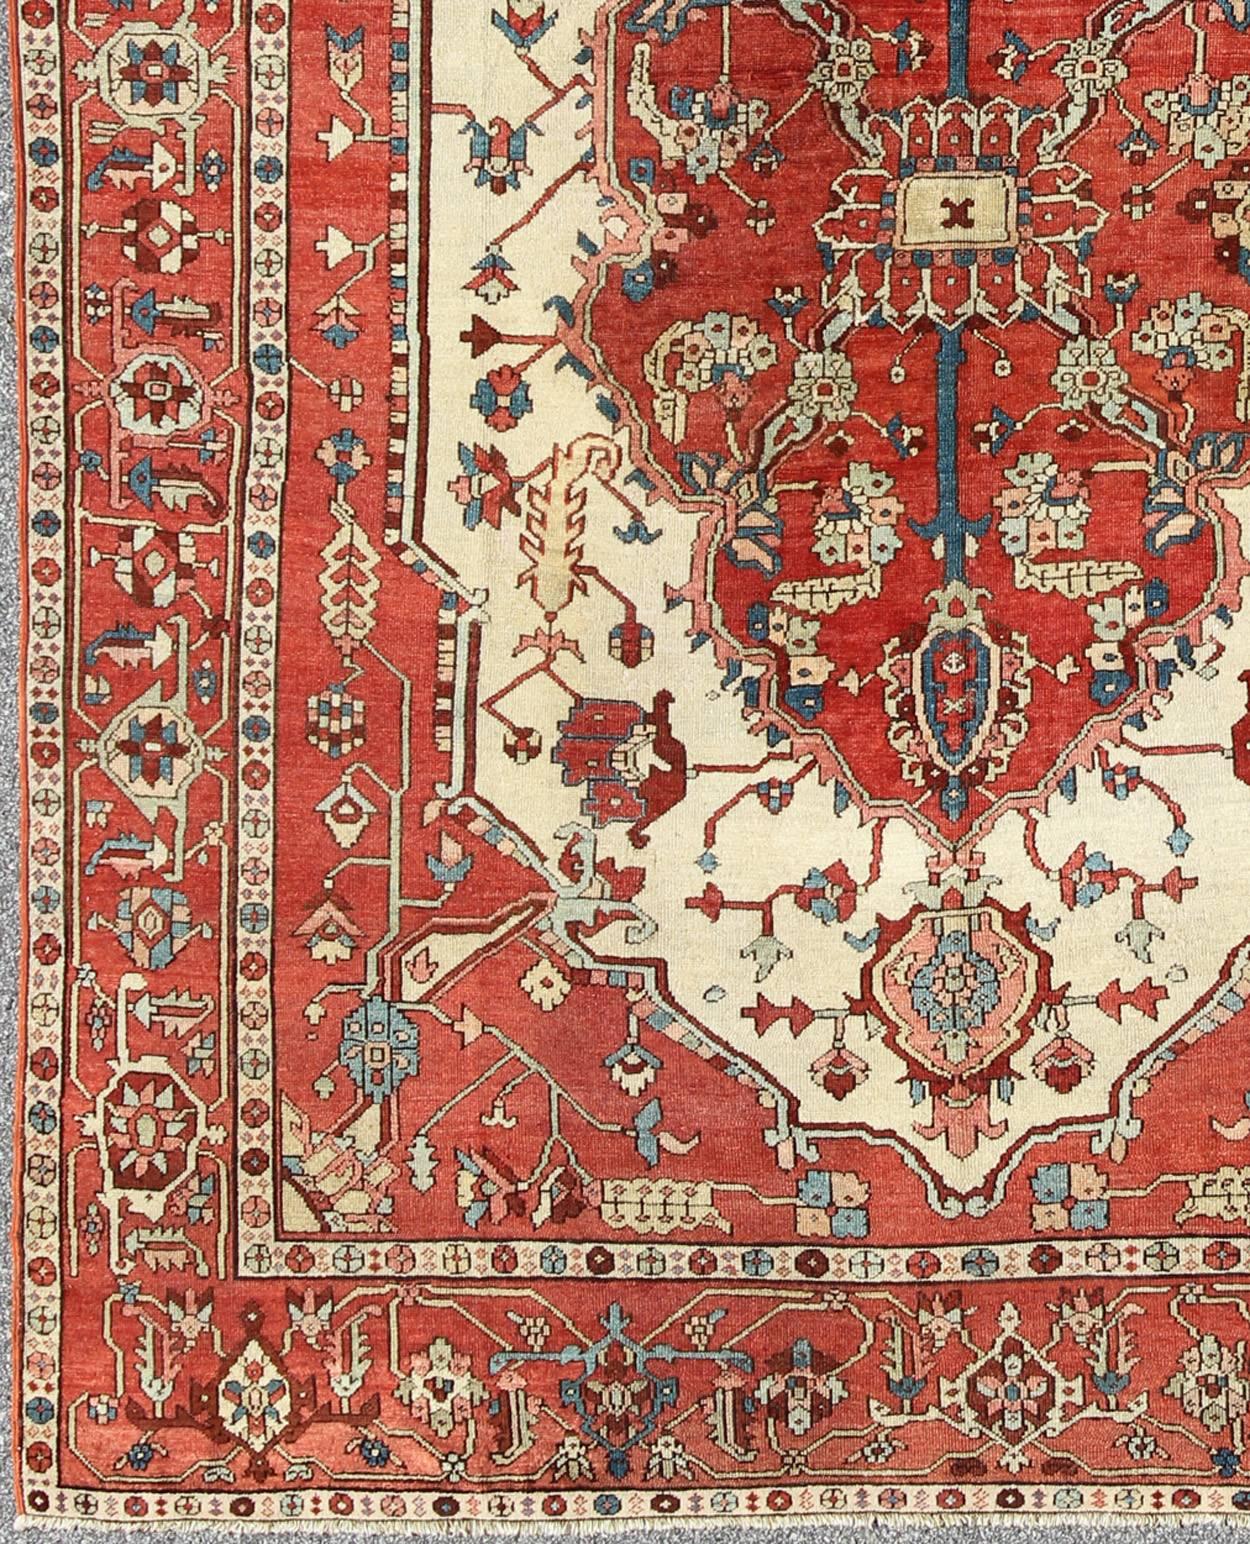 Antique Persian Serapi Rug from 19th century, Keivan Woven Arts / rug /TRA-0781, country of origin / type: Iran / Serapi , circa 1890.

Measures: 9' x 11'5

With an adaptation of ancient weaving, Serapi carpets are prized for their fine